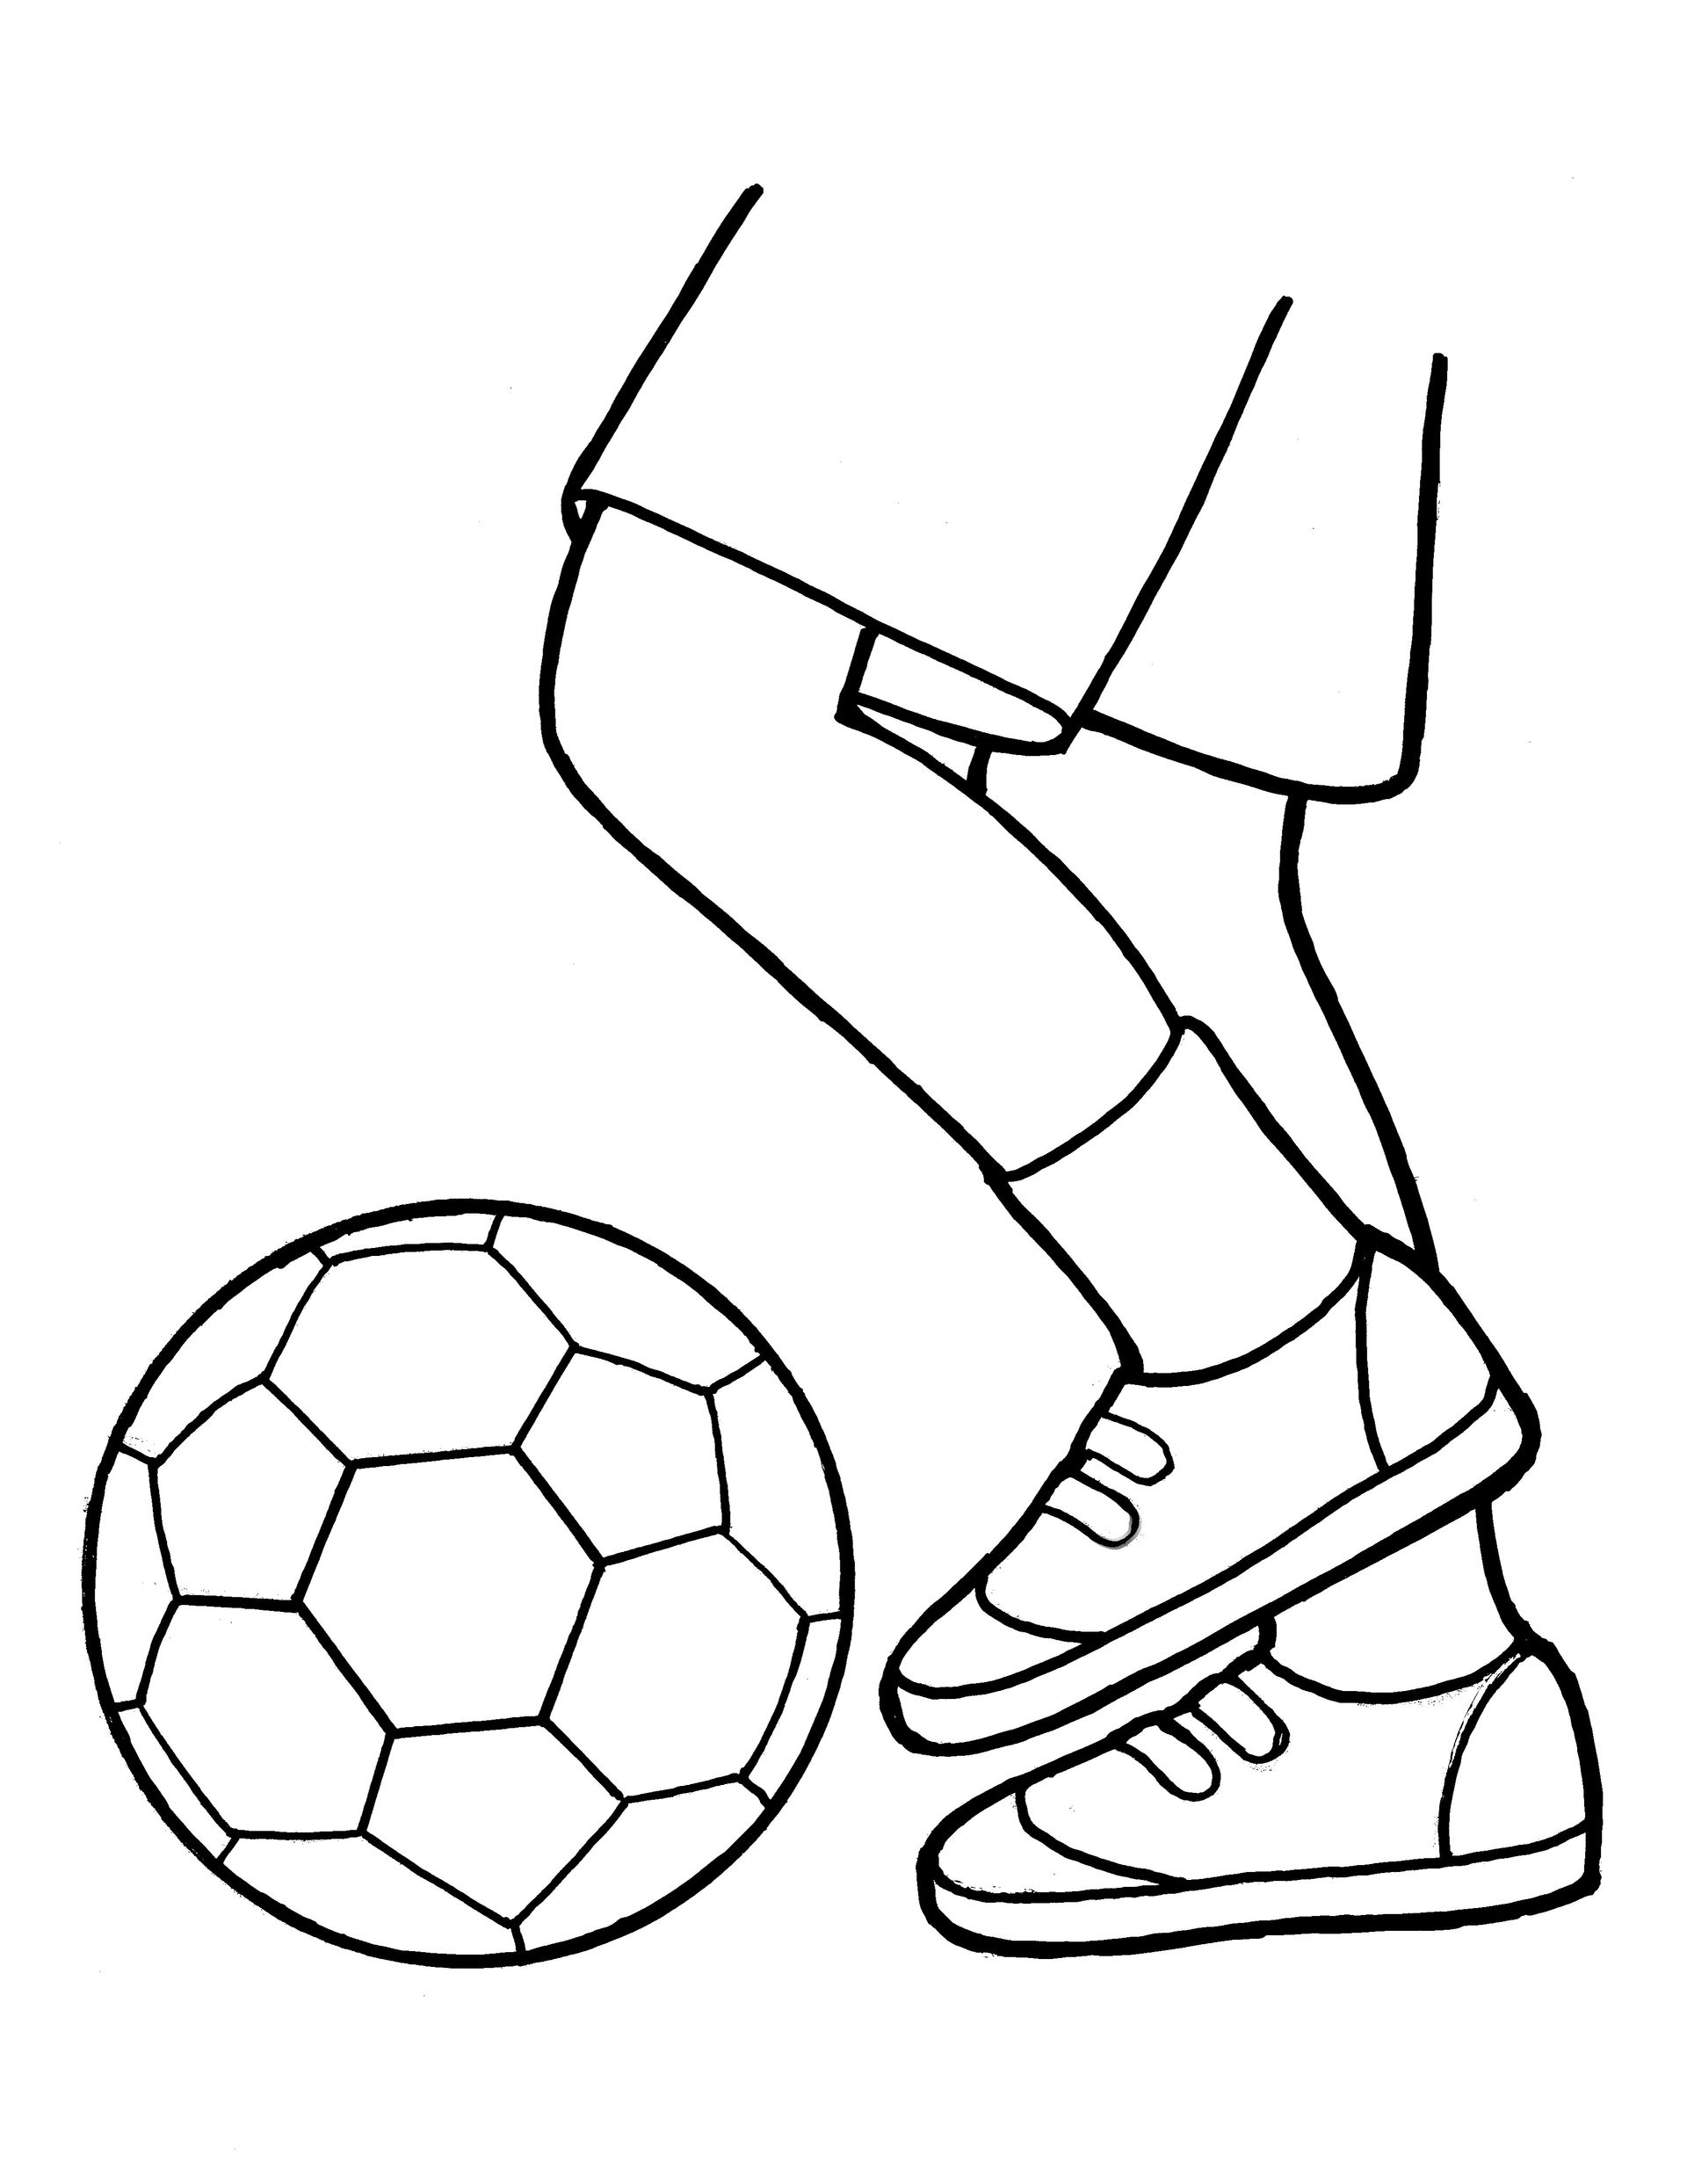 how to draw someone kicking a soccer ball